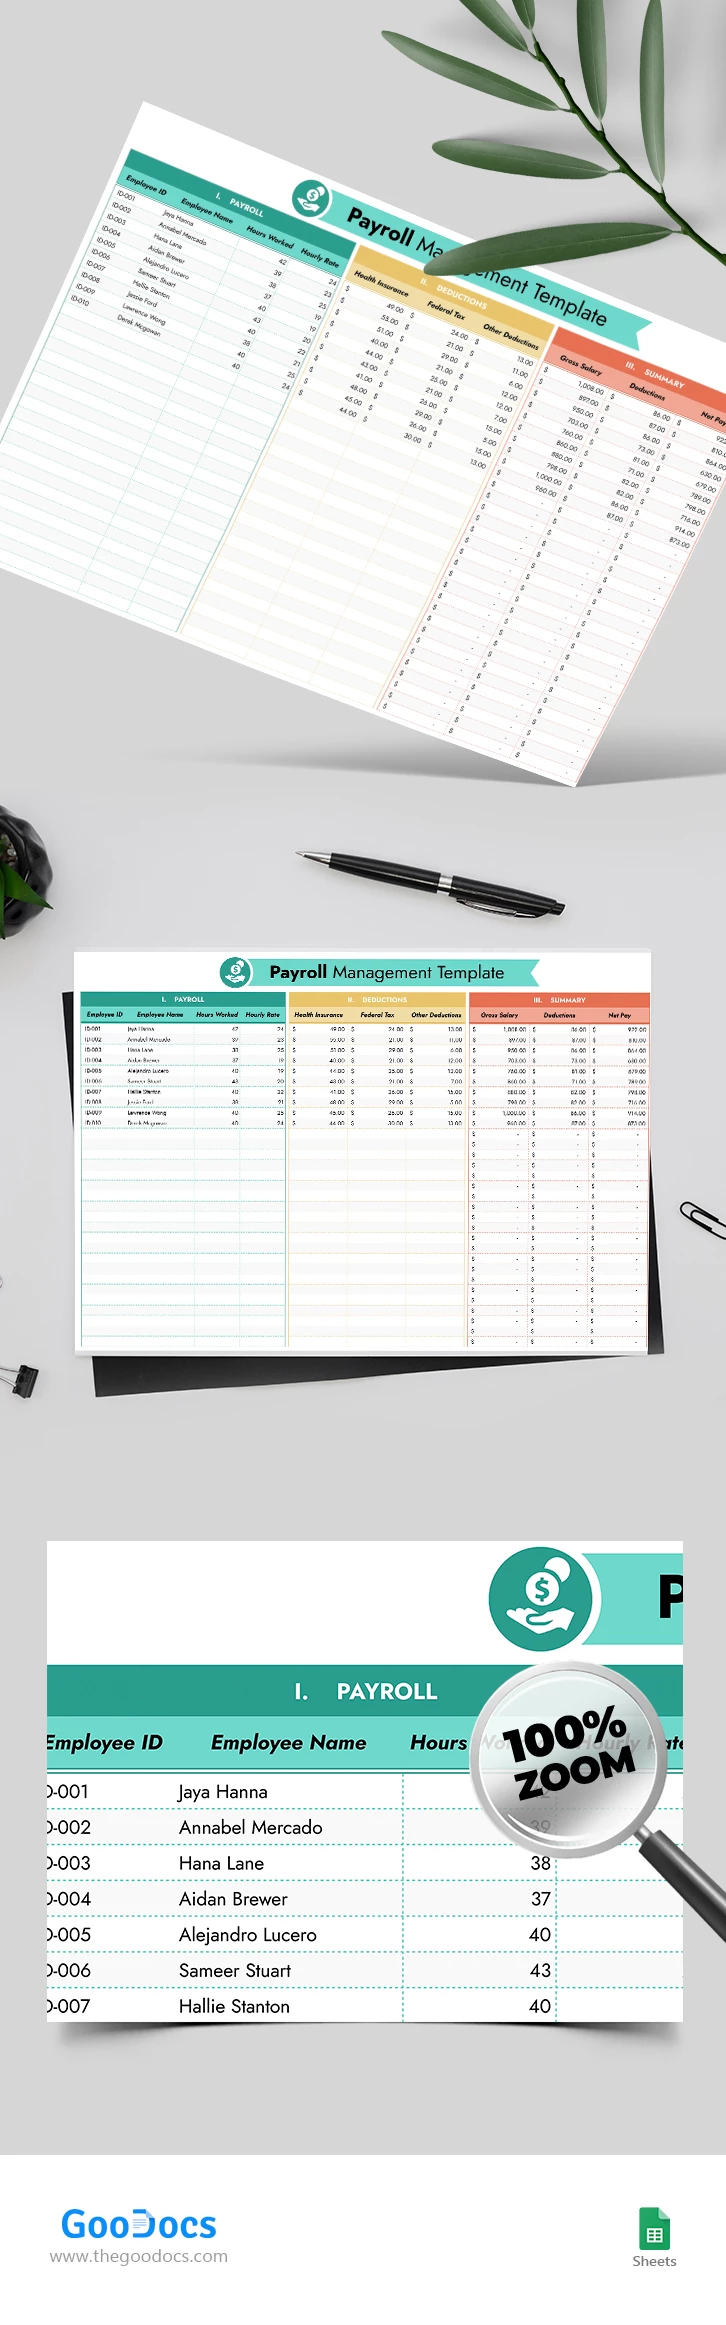 Colorful Payroll Management - free Google Docs Template - 10068268